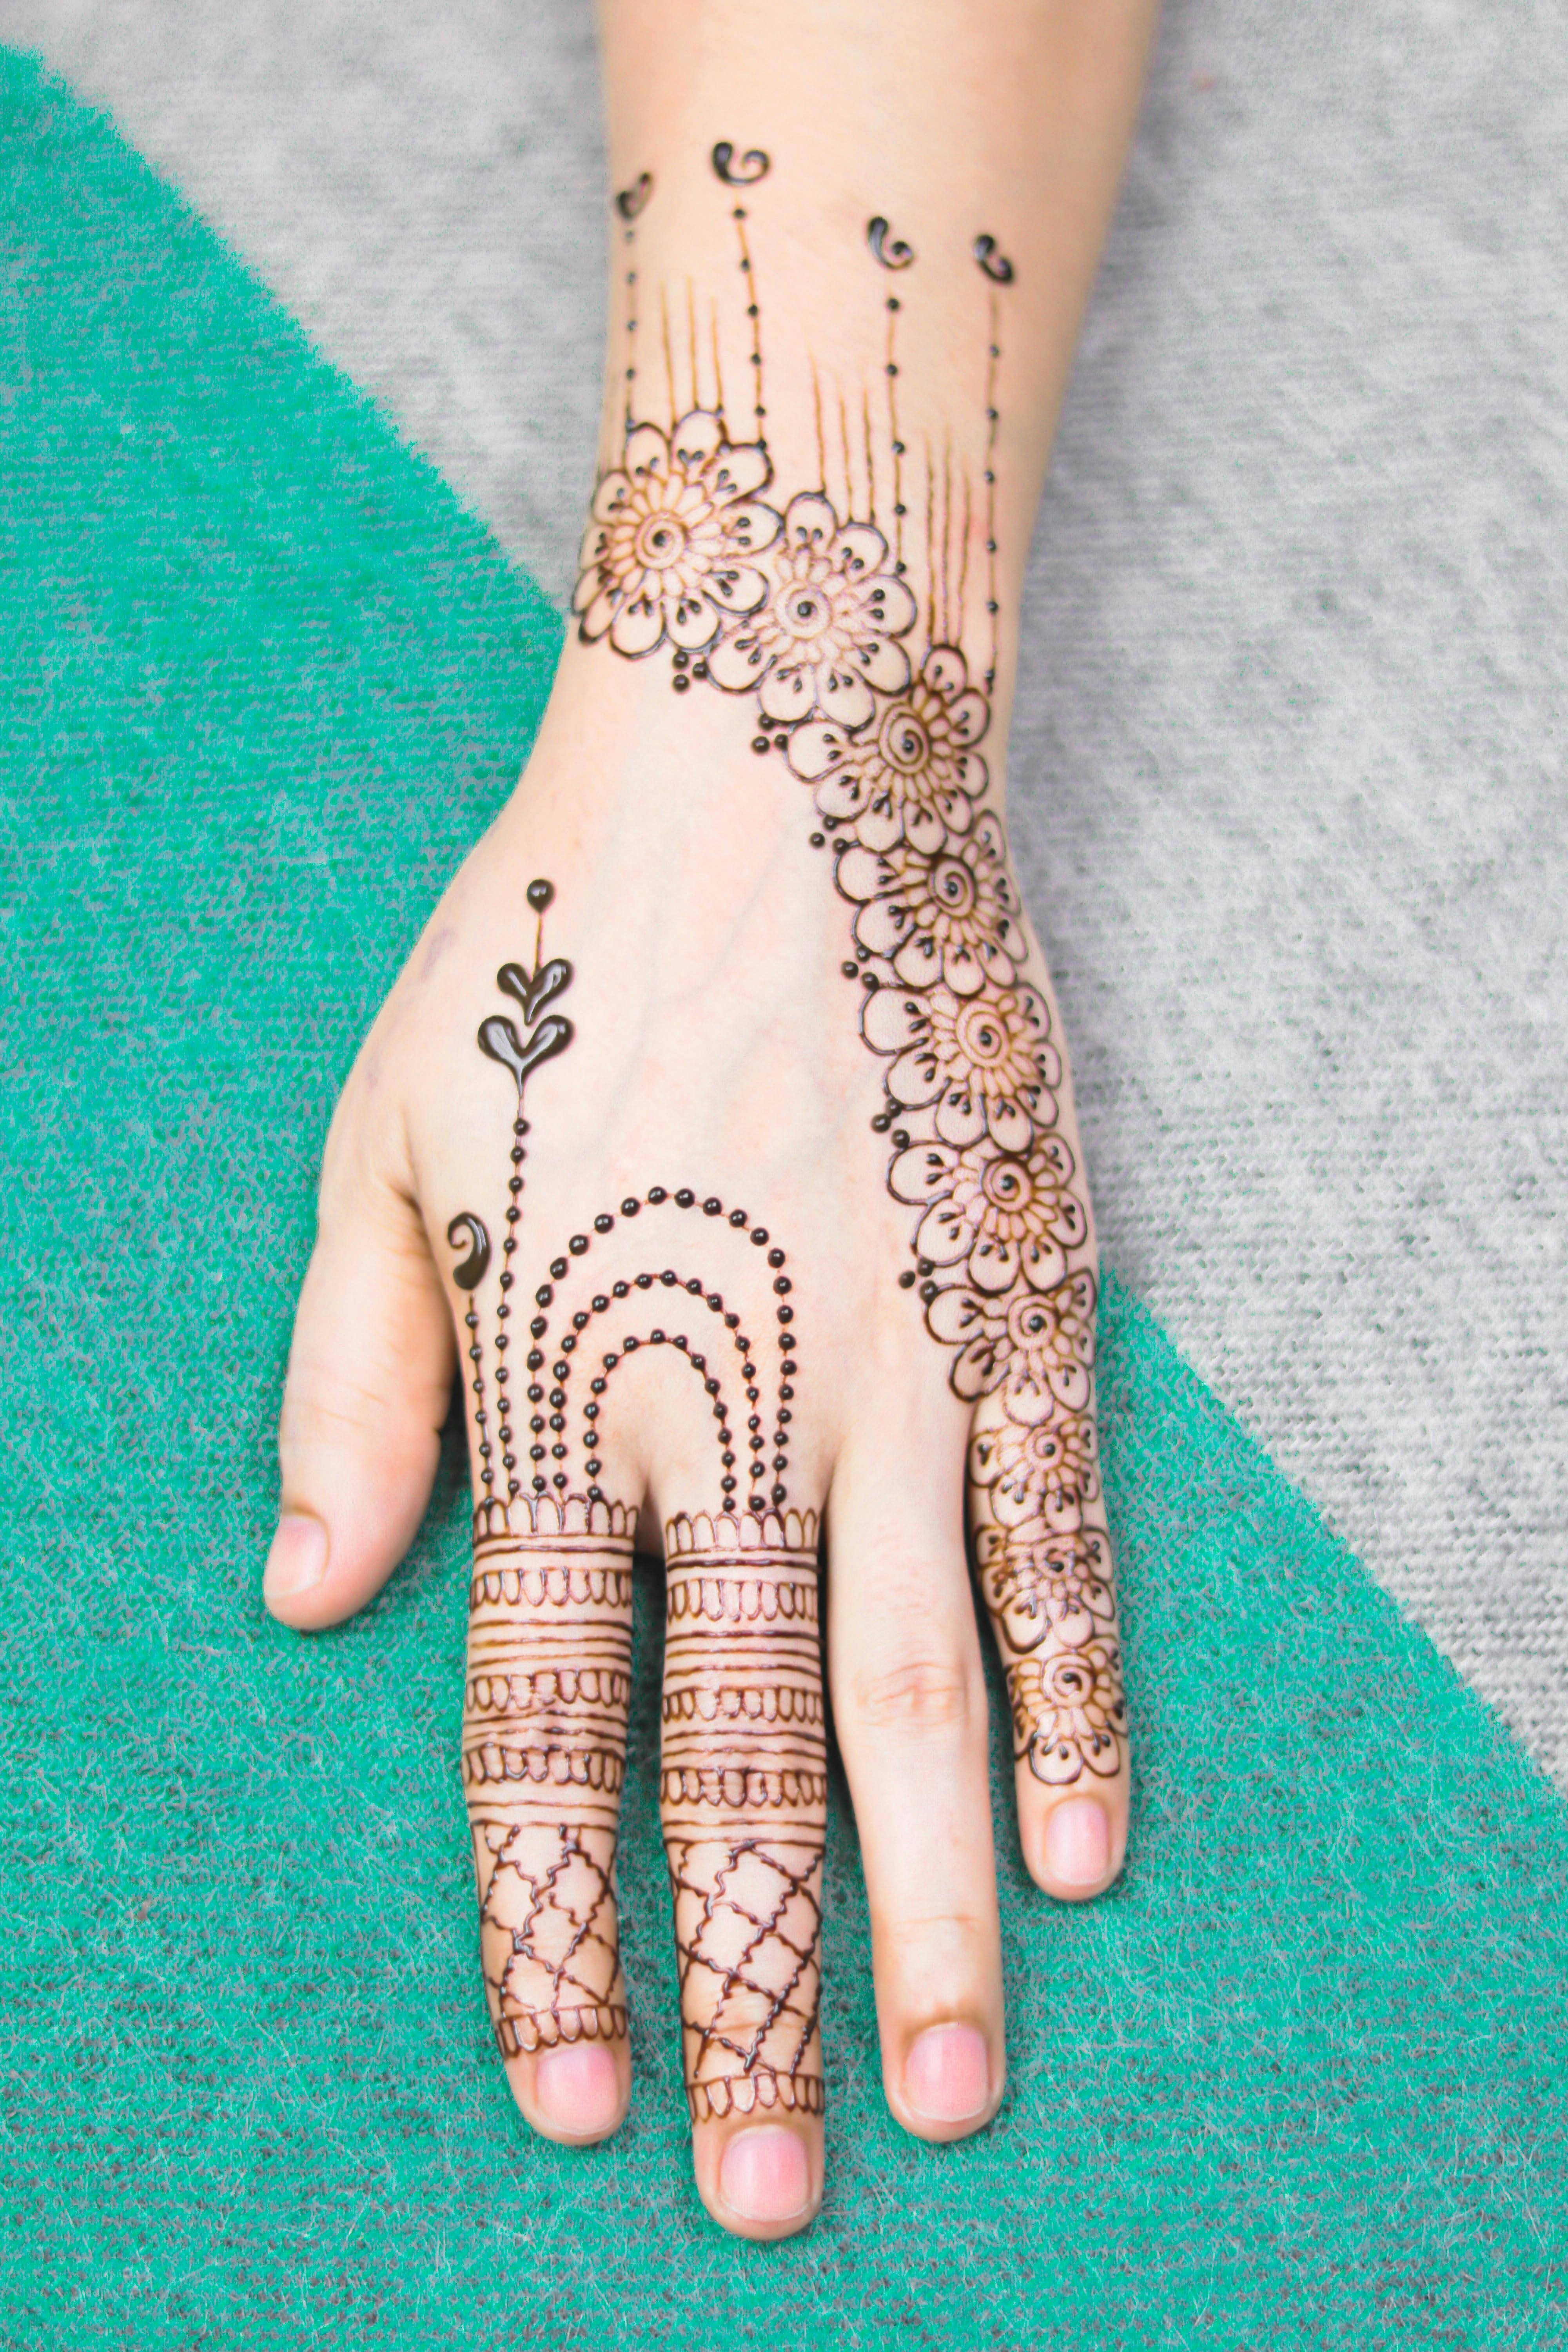 Henna Tattoo on a Person's Hand · Free Stock Photo